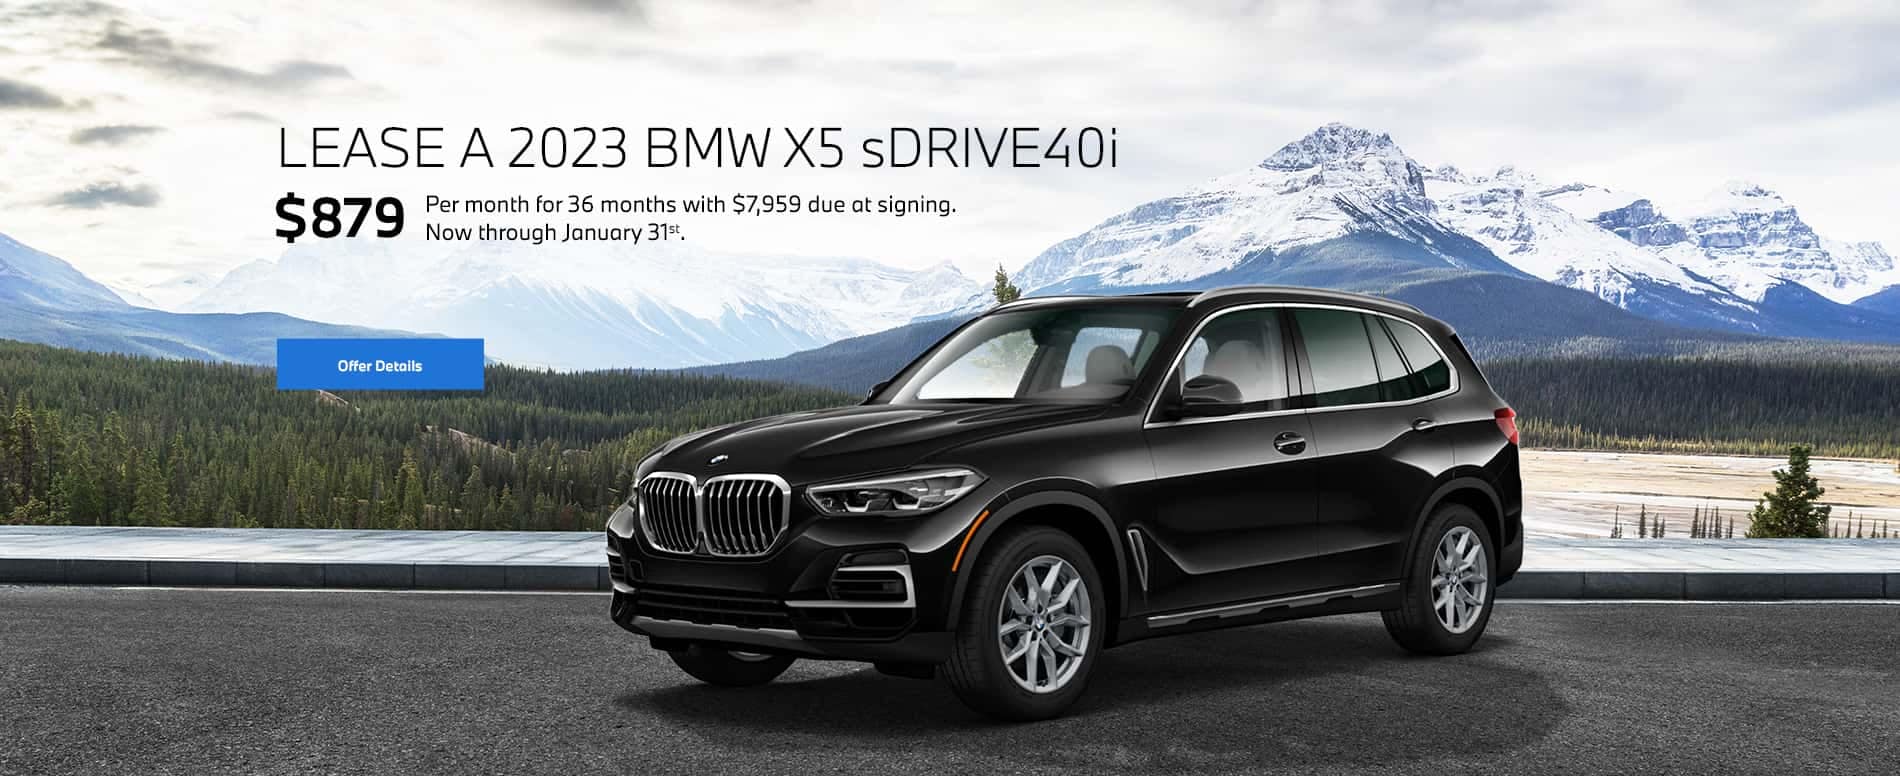 2023 X5 lease starting at $879 per month for 36 months